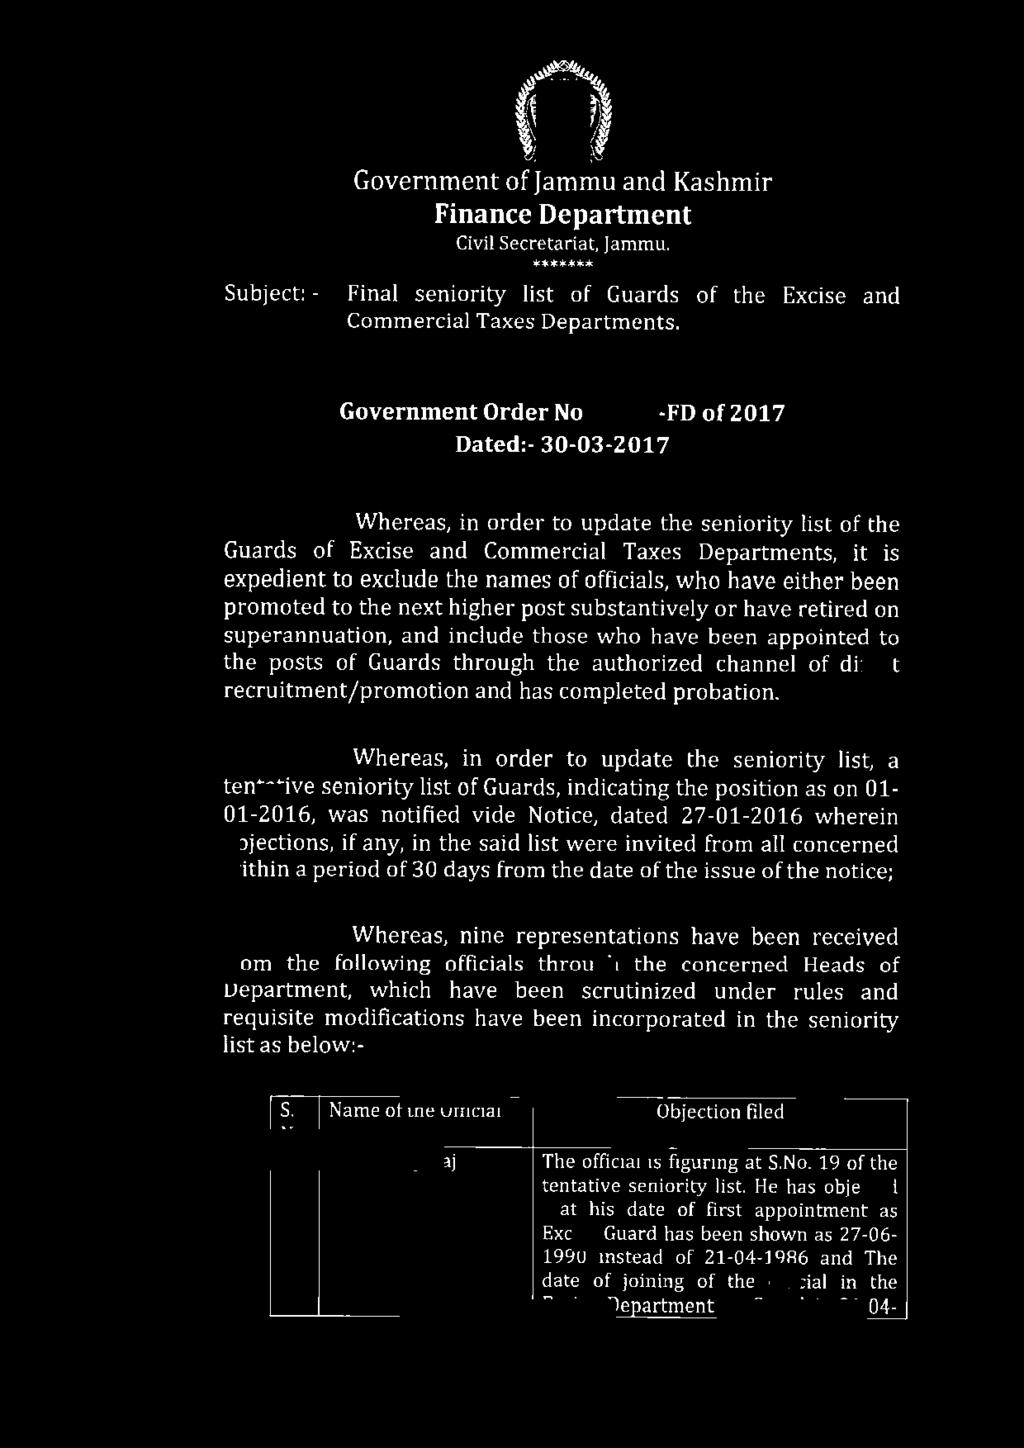 Subject: - Government of Jammu and Kashmir Finance Department Civil Secretariat, Jammu. ******* Final seniority list of Guards of the Excise and Commercial Taxes Departments. Government Order No.